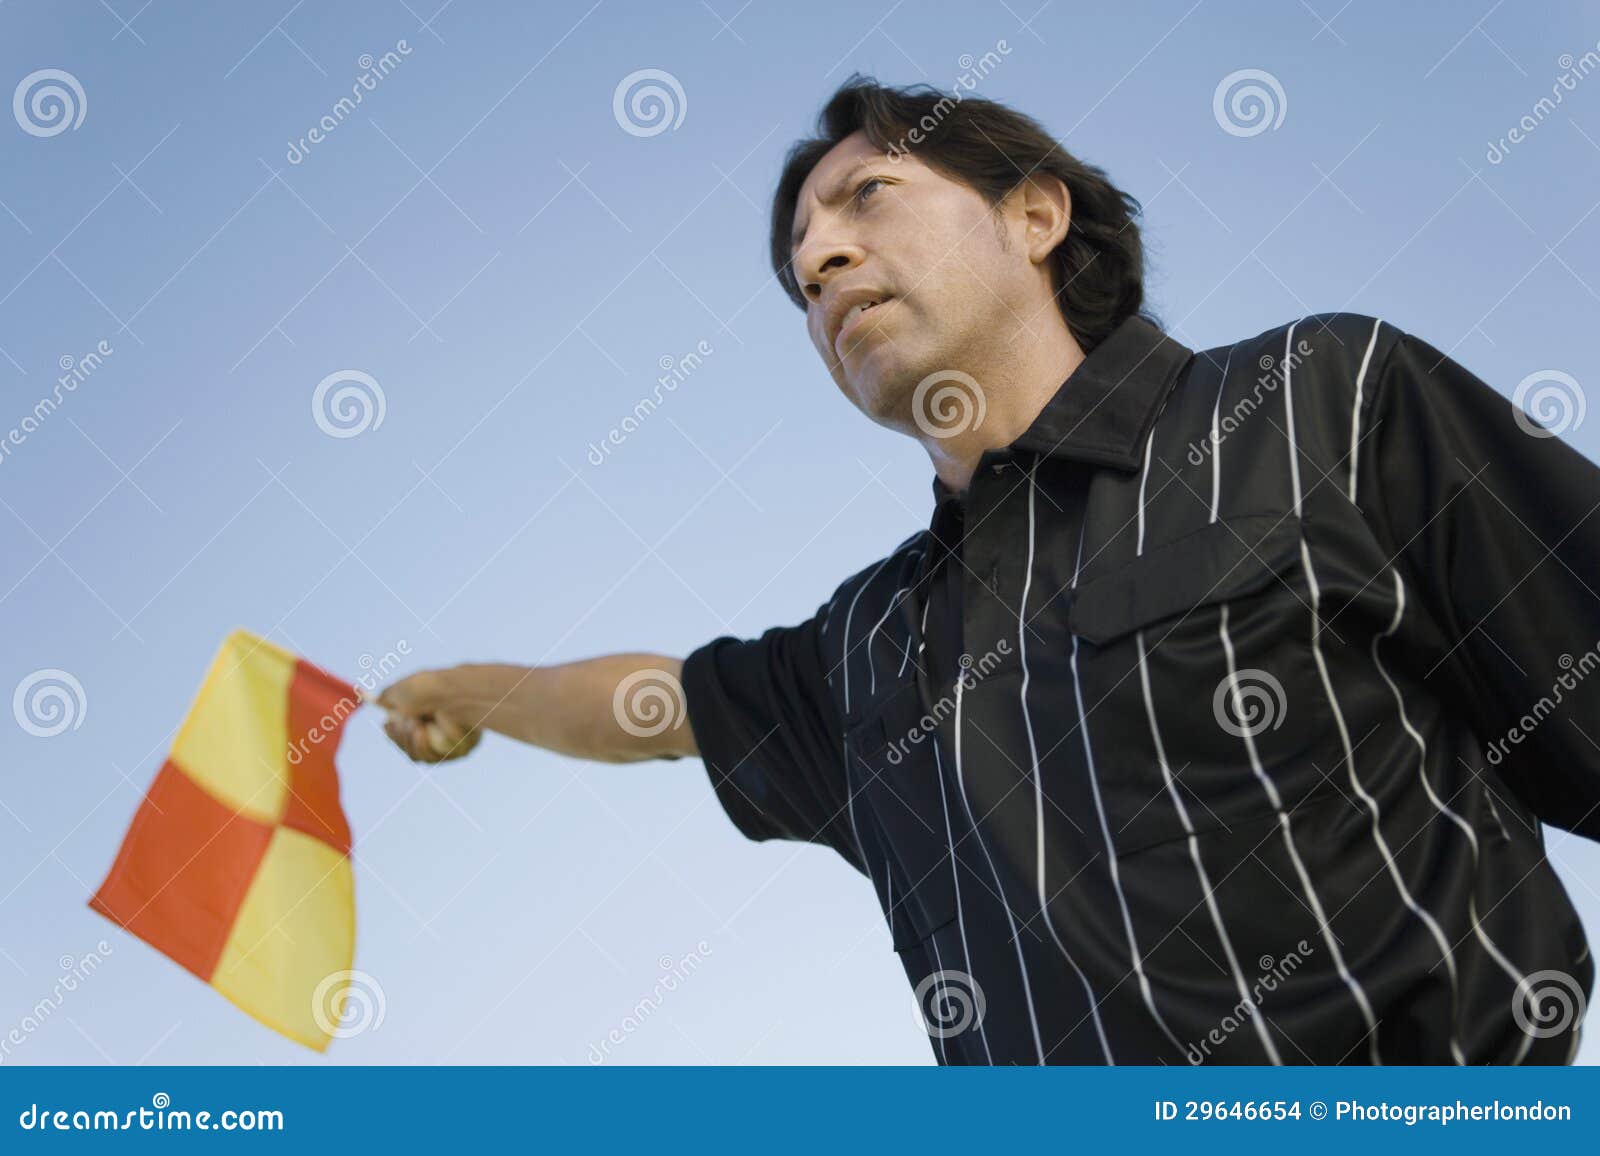 Soccer Referee Showing Offside Flag Stock Photo Image of soccer 